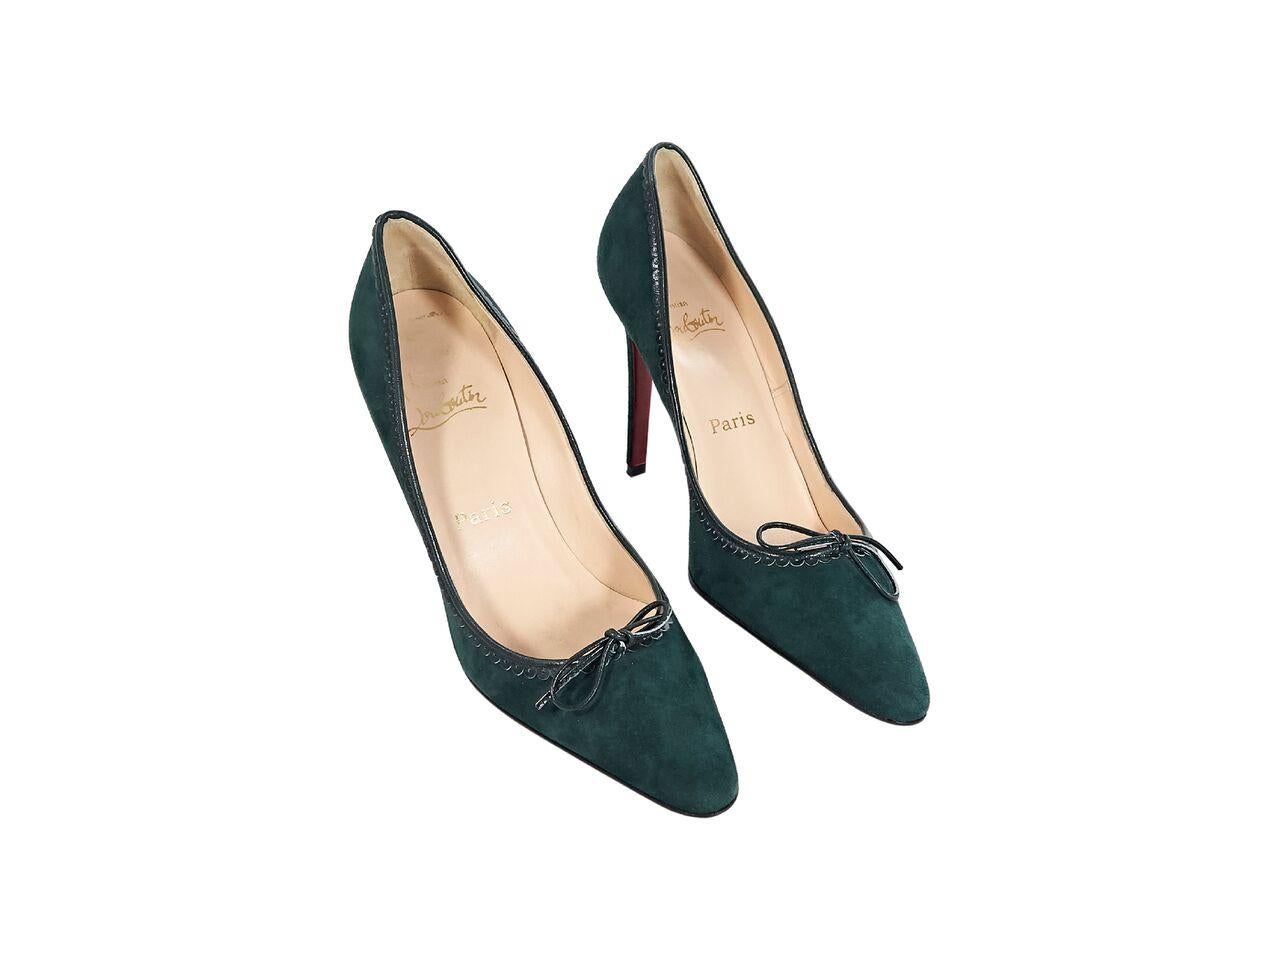 Product details:  Green suede pumps by Christian Louboutin.  Accented with scalloped leather trim.  Point toe.  Iconic red sole.  Slip-on style.  4